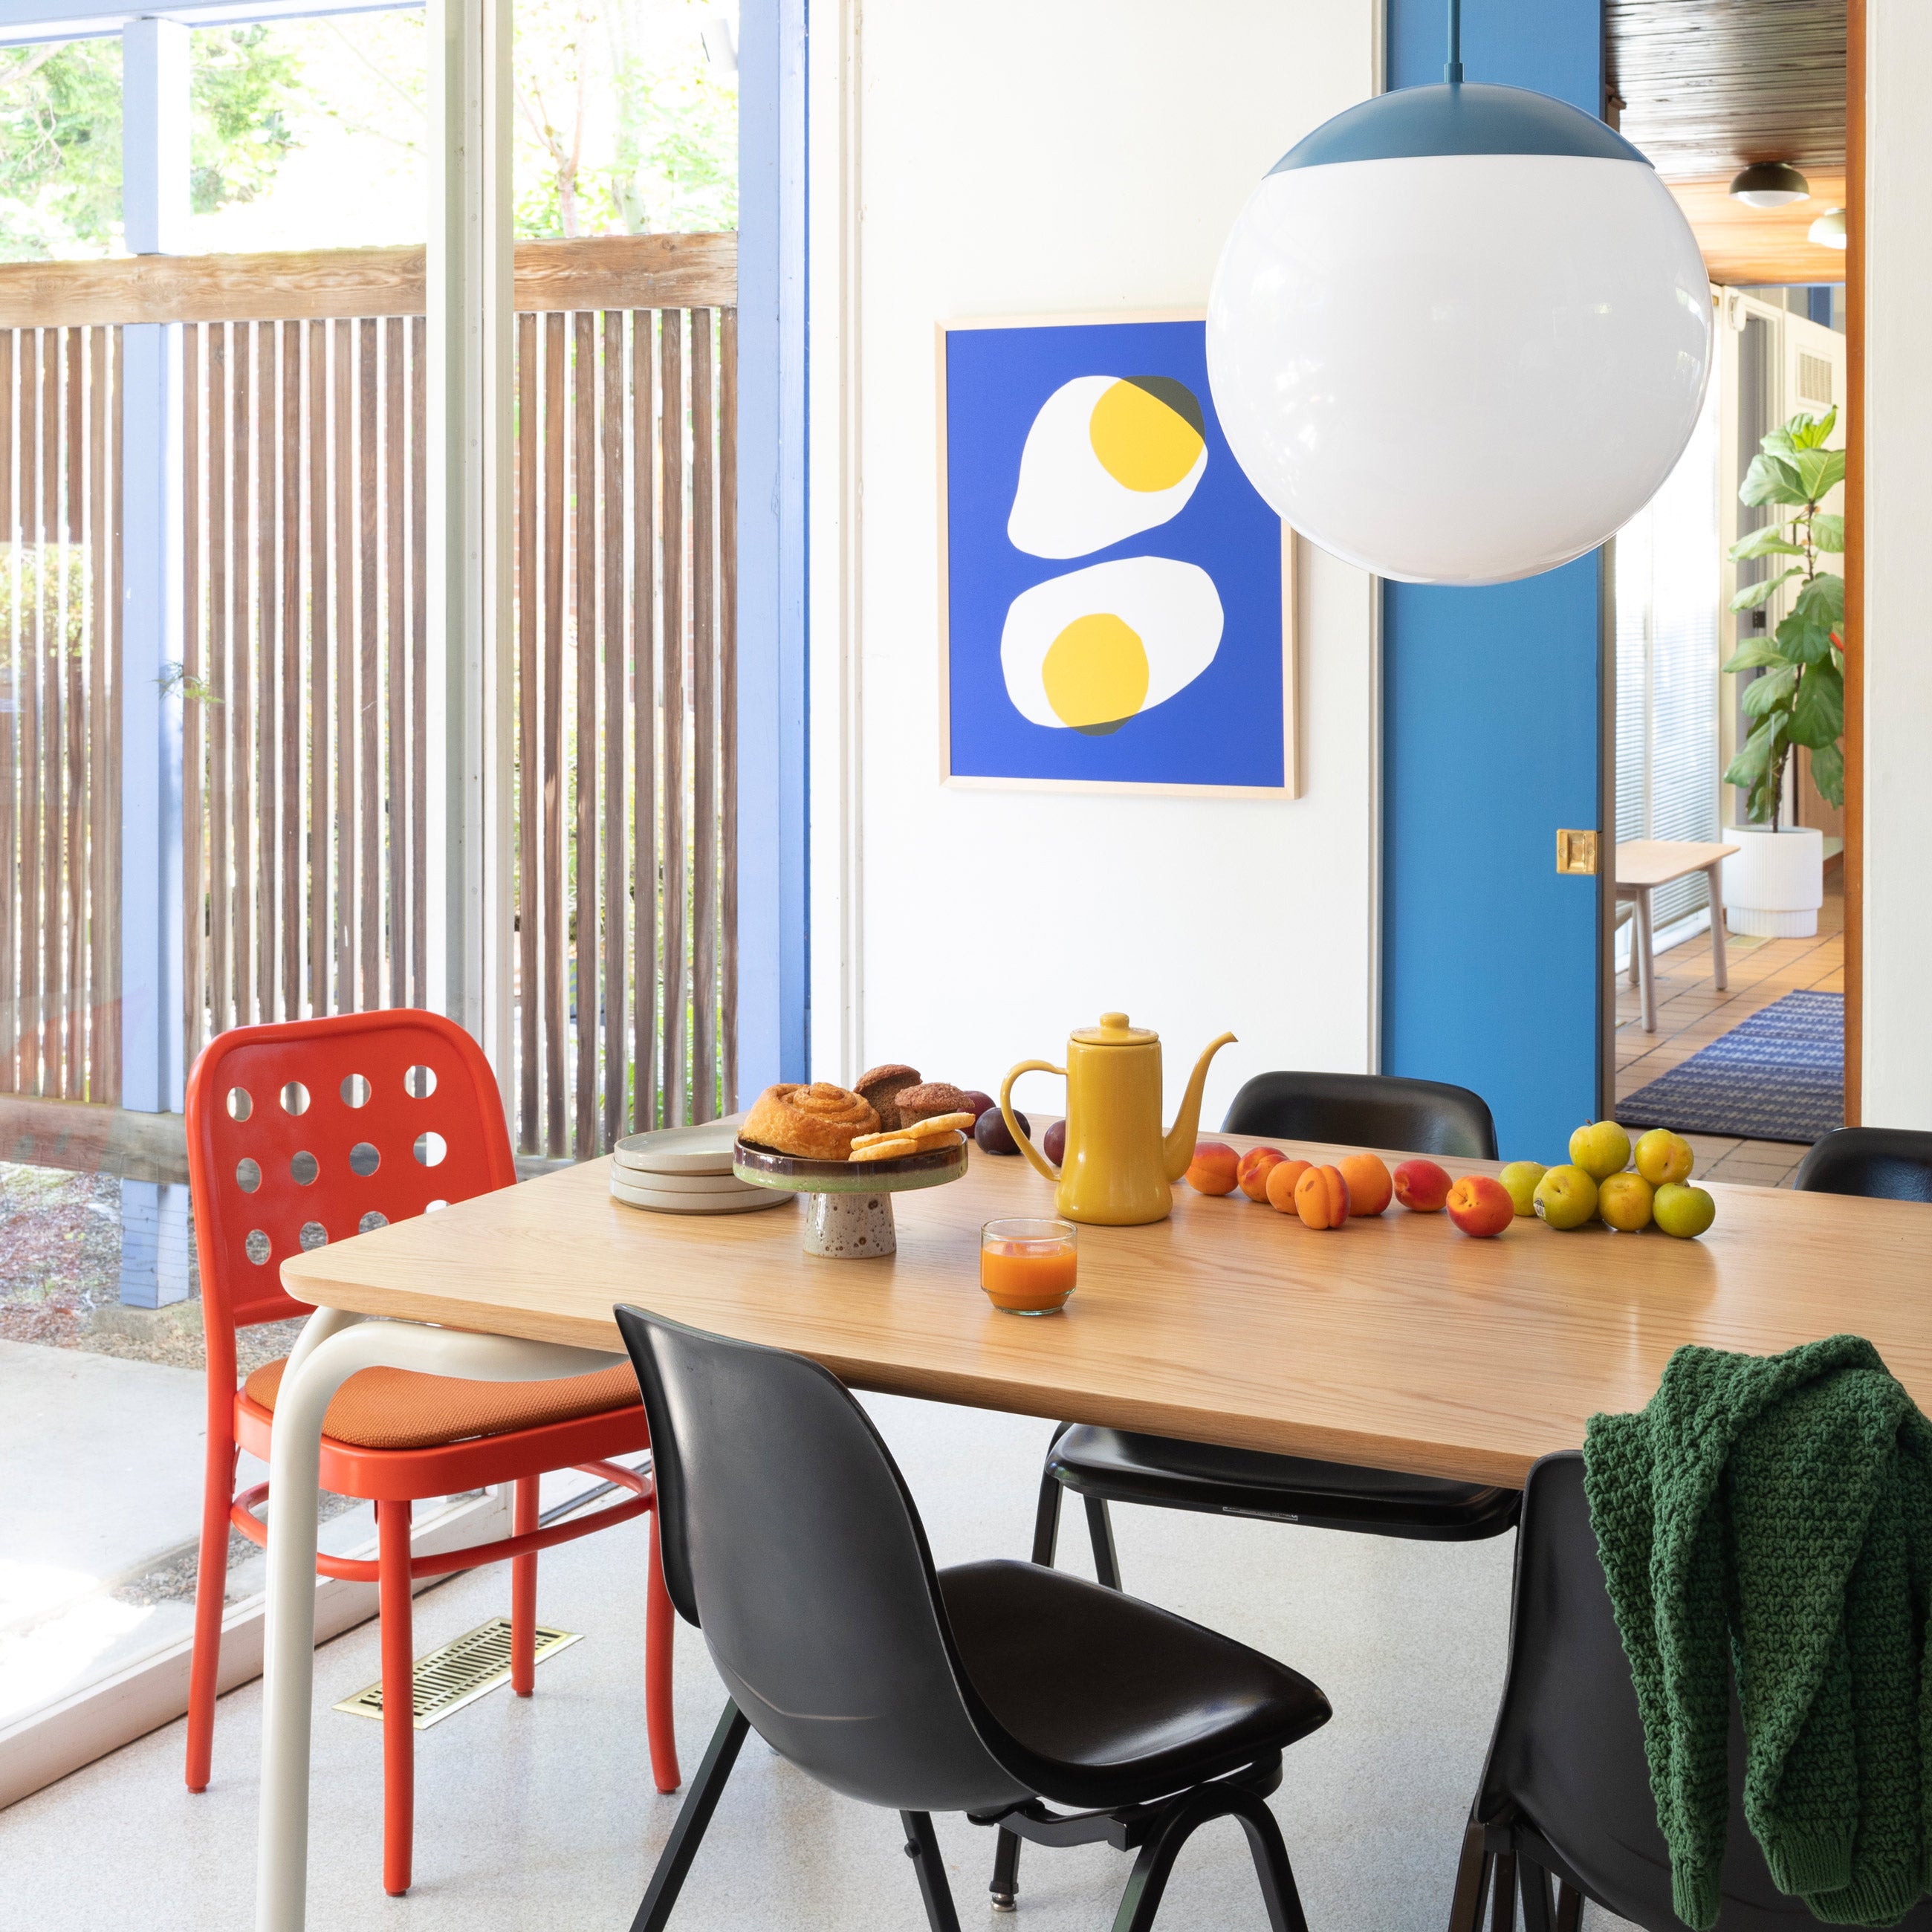 Dining table with lots of bright colors.